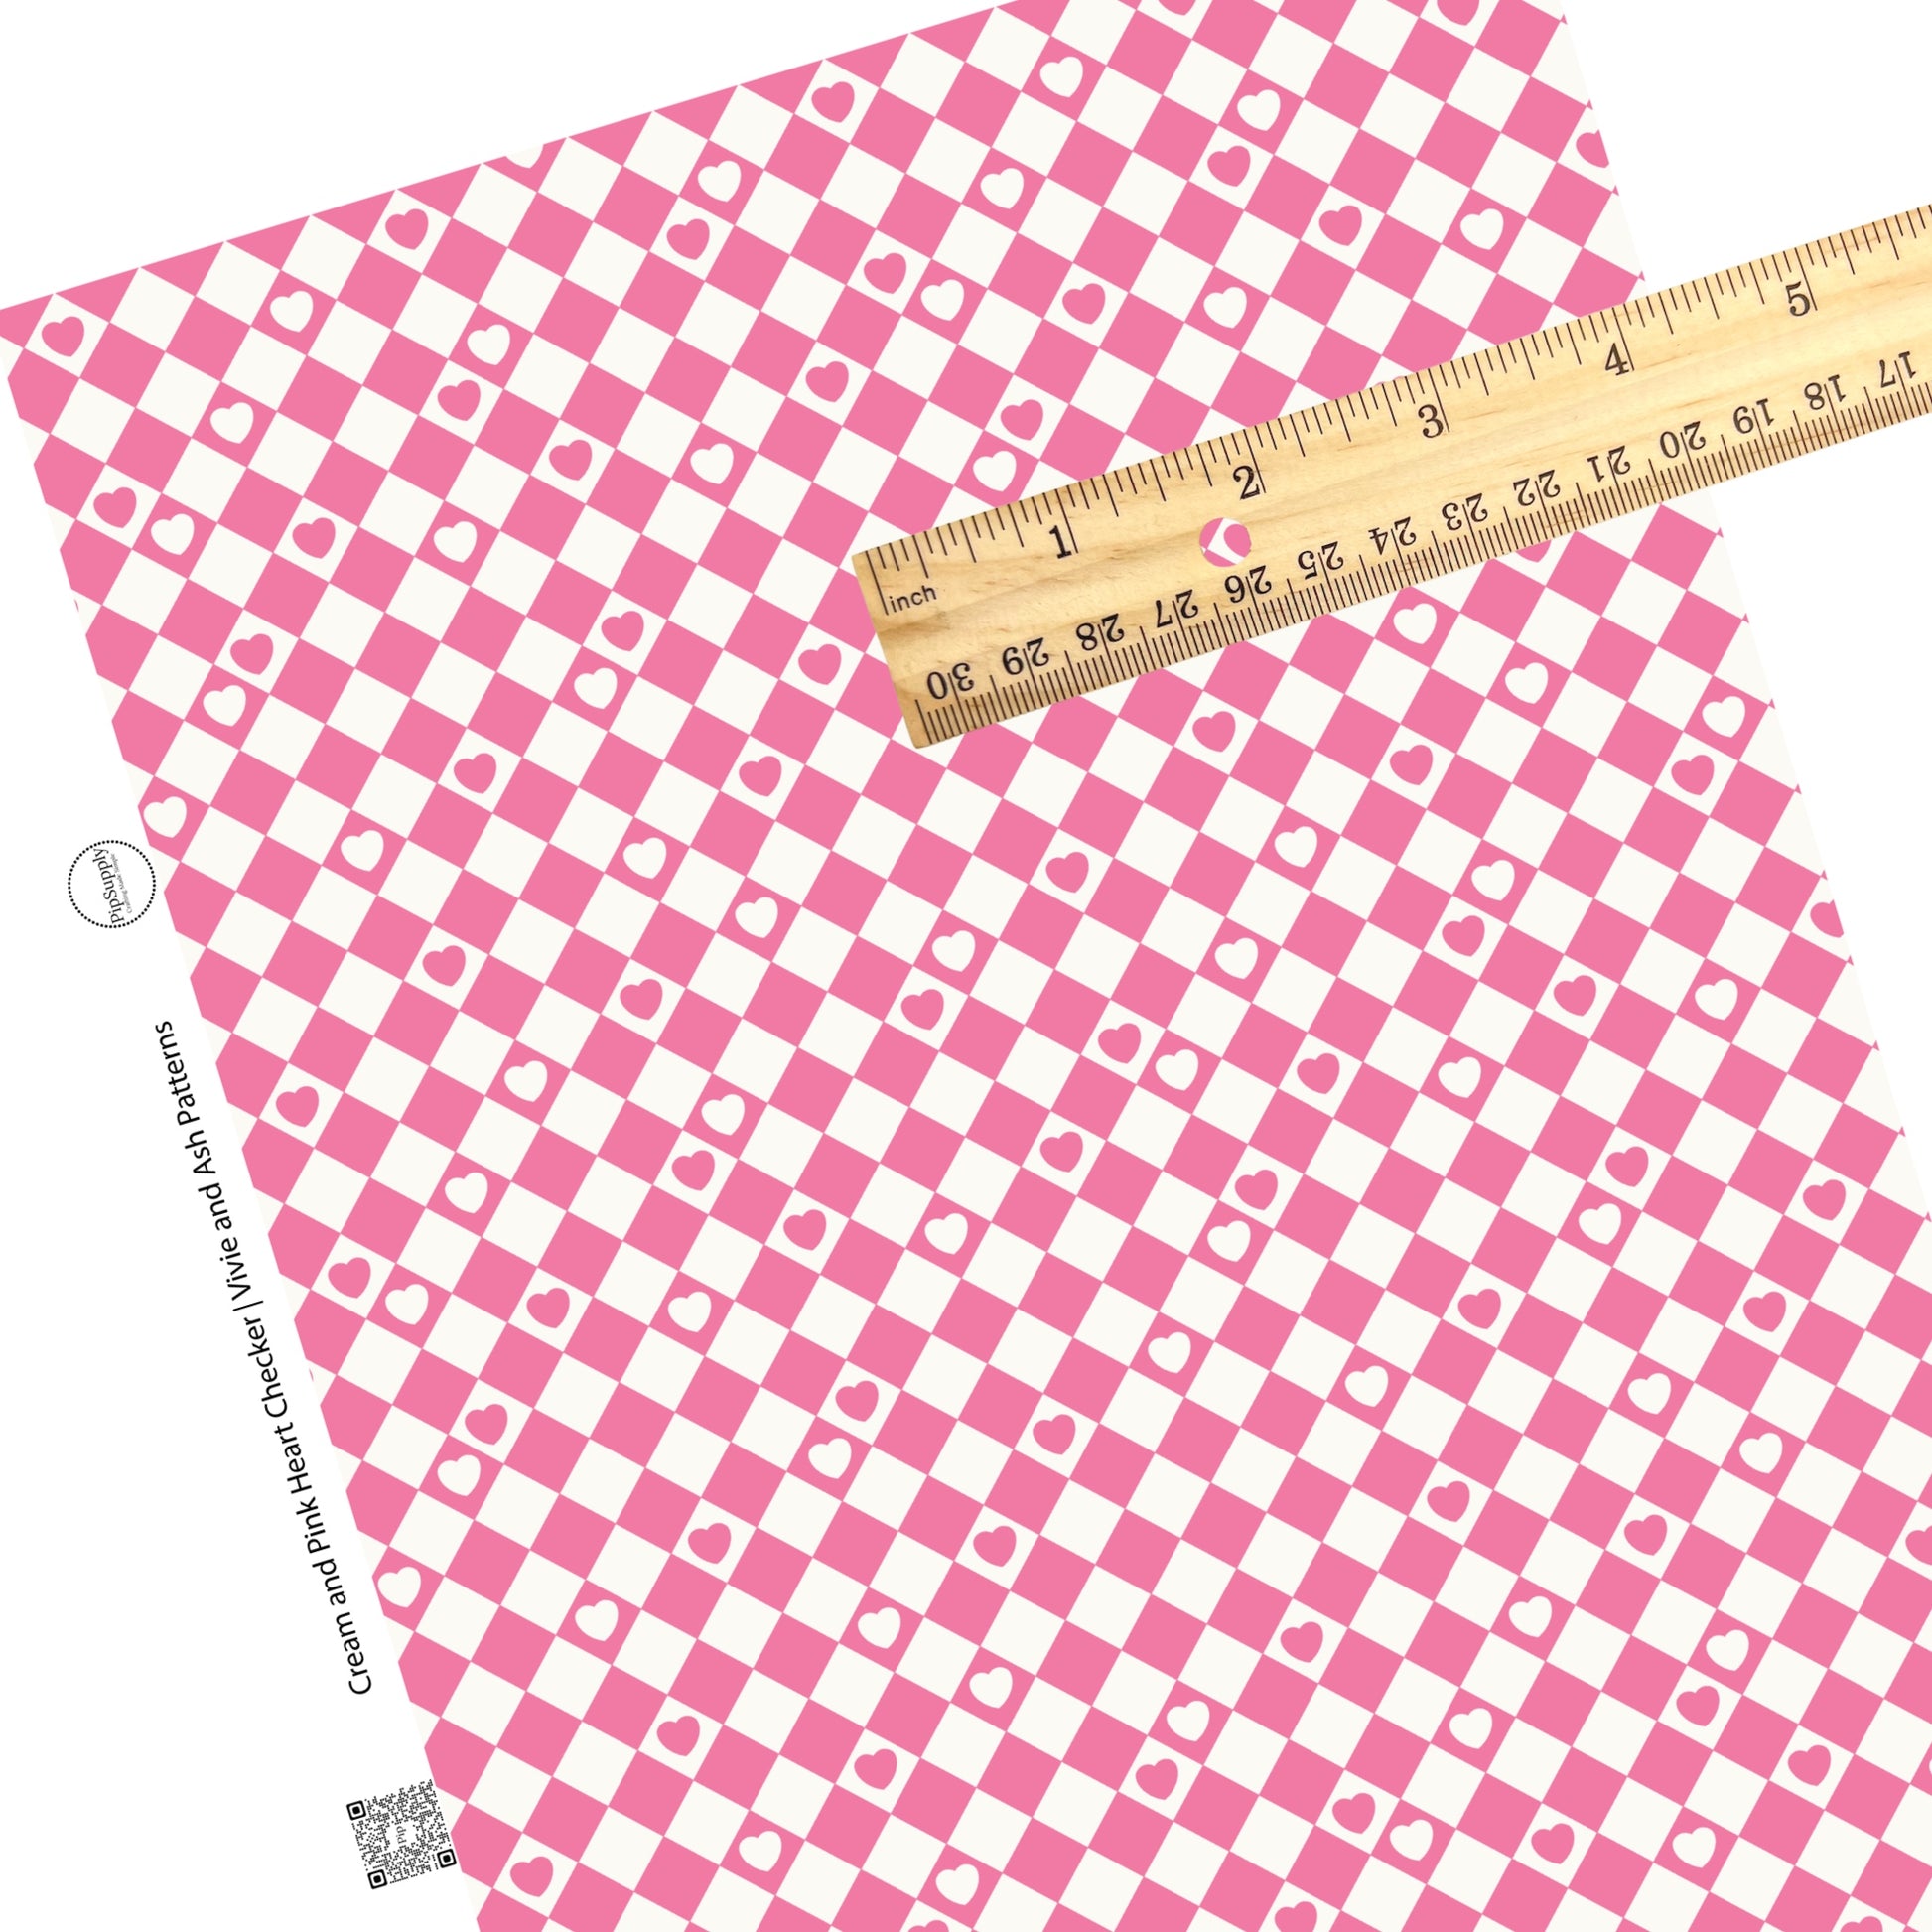 These Valentine's pattern themed faux leather sheets contain the following design elements: pink and cream checker pattern with tiny hearts. Our CPSIA compliant faux leather sheets or rolls can be used for all types of crafting projects.